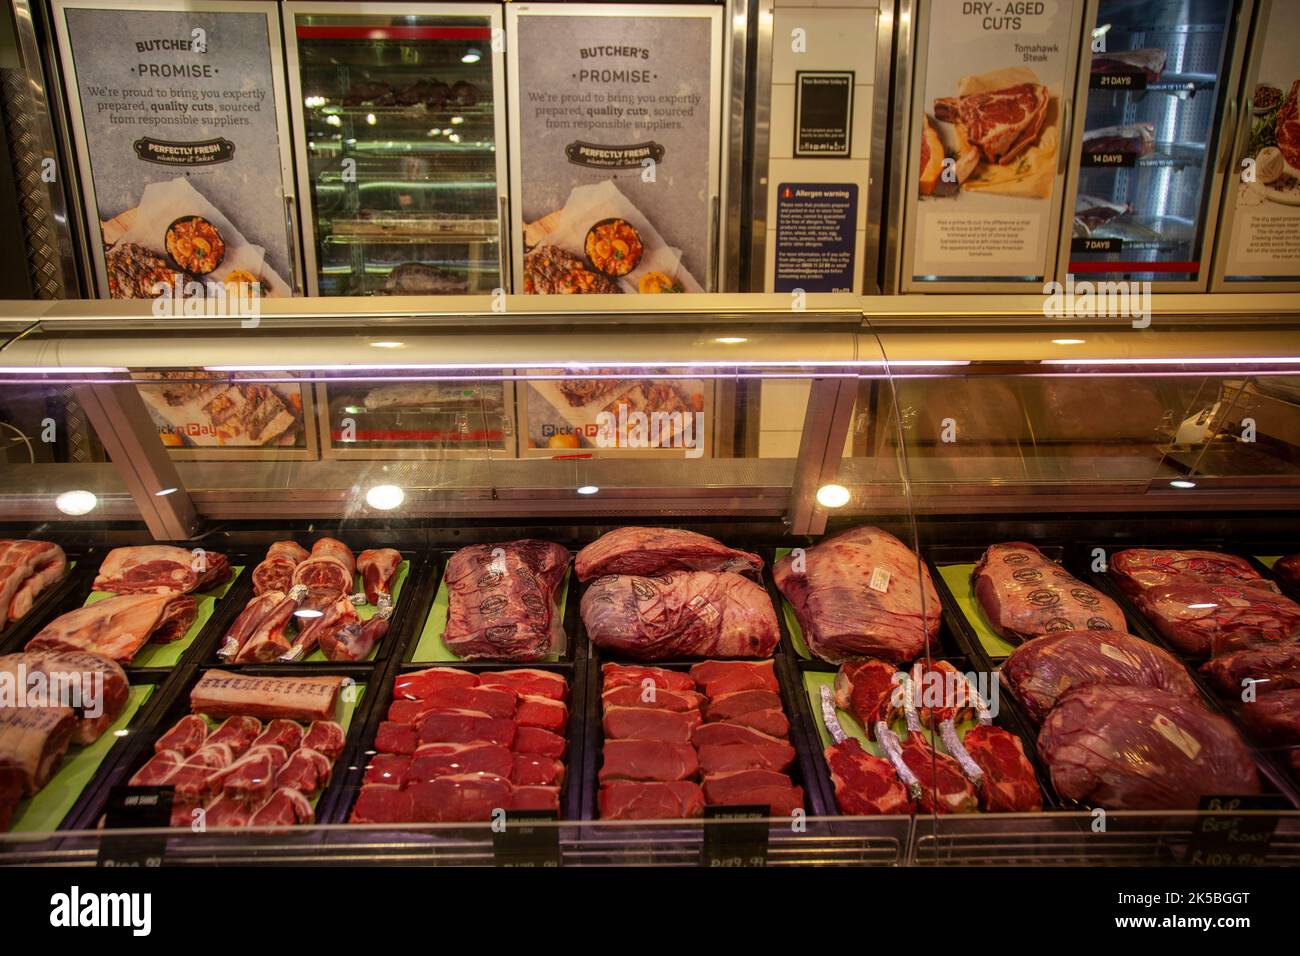 Butcher at Pick N Pay Grocery Store in Cape Town, South Africa Stock Photo